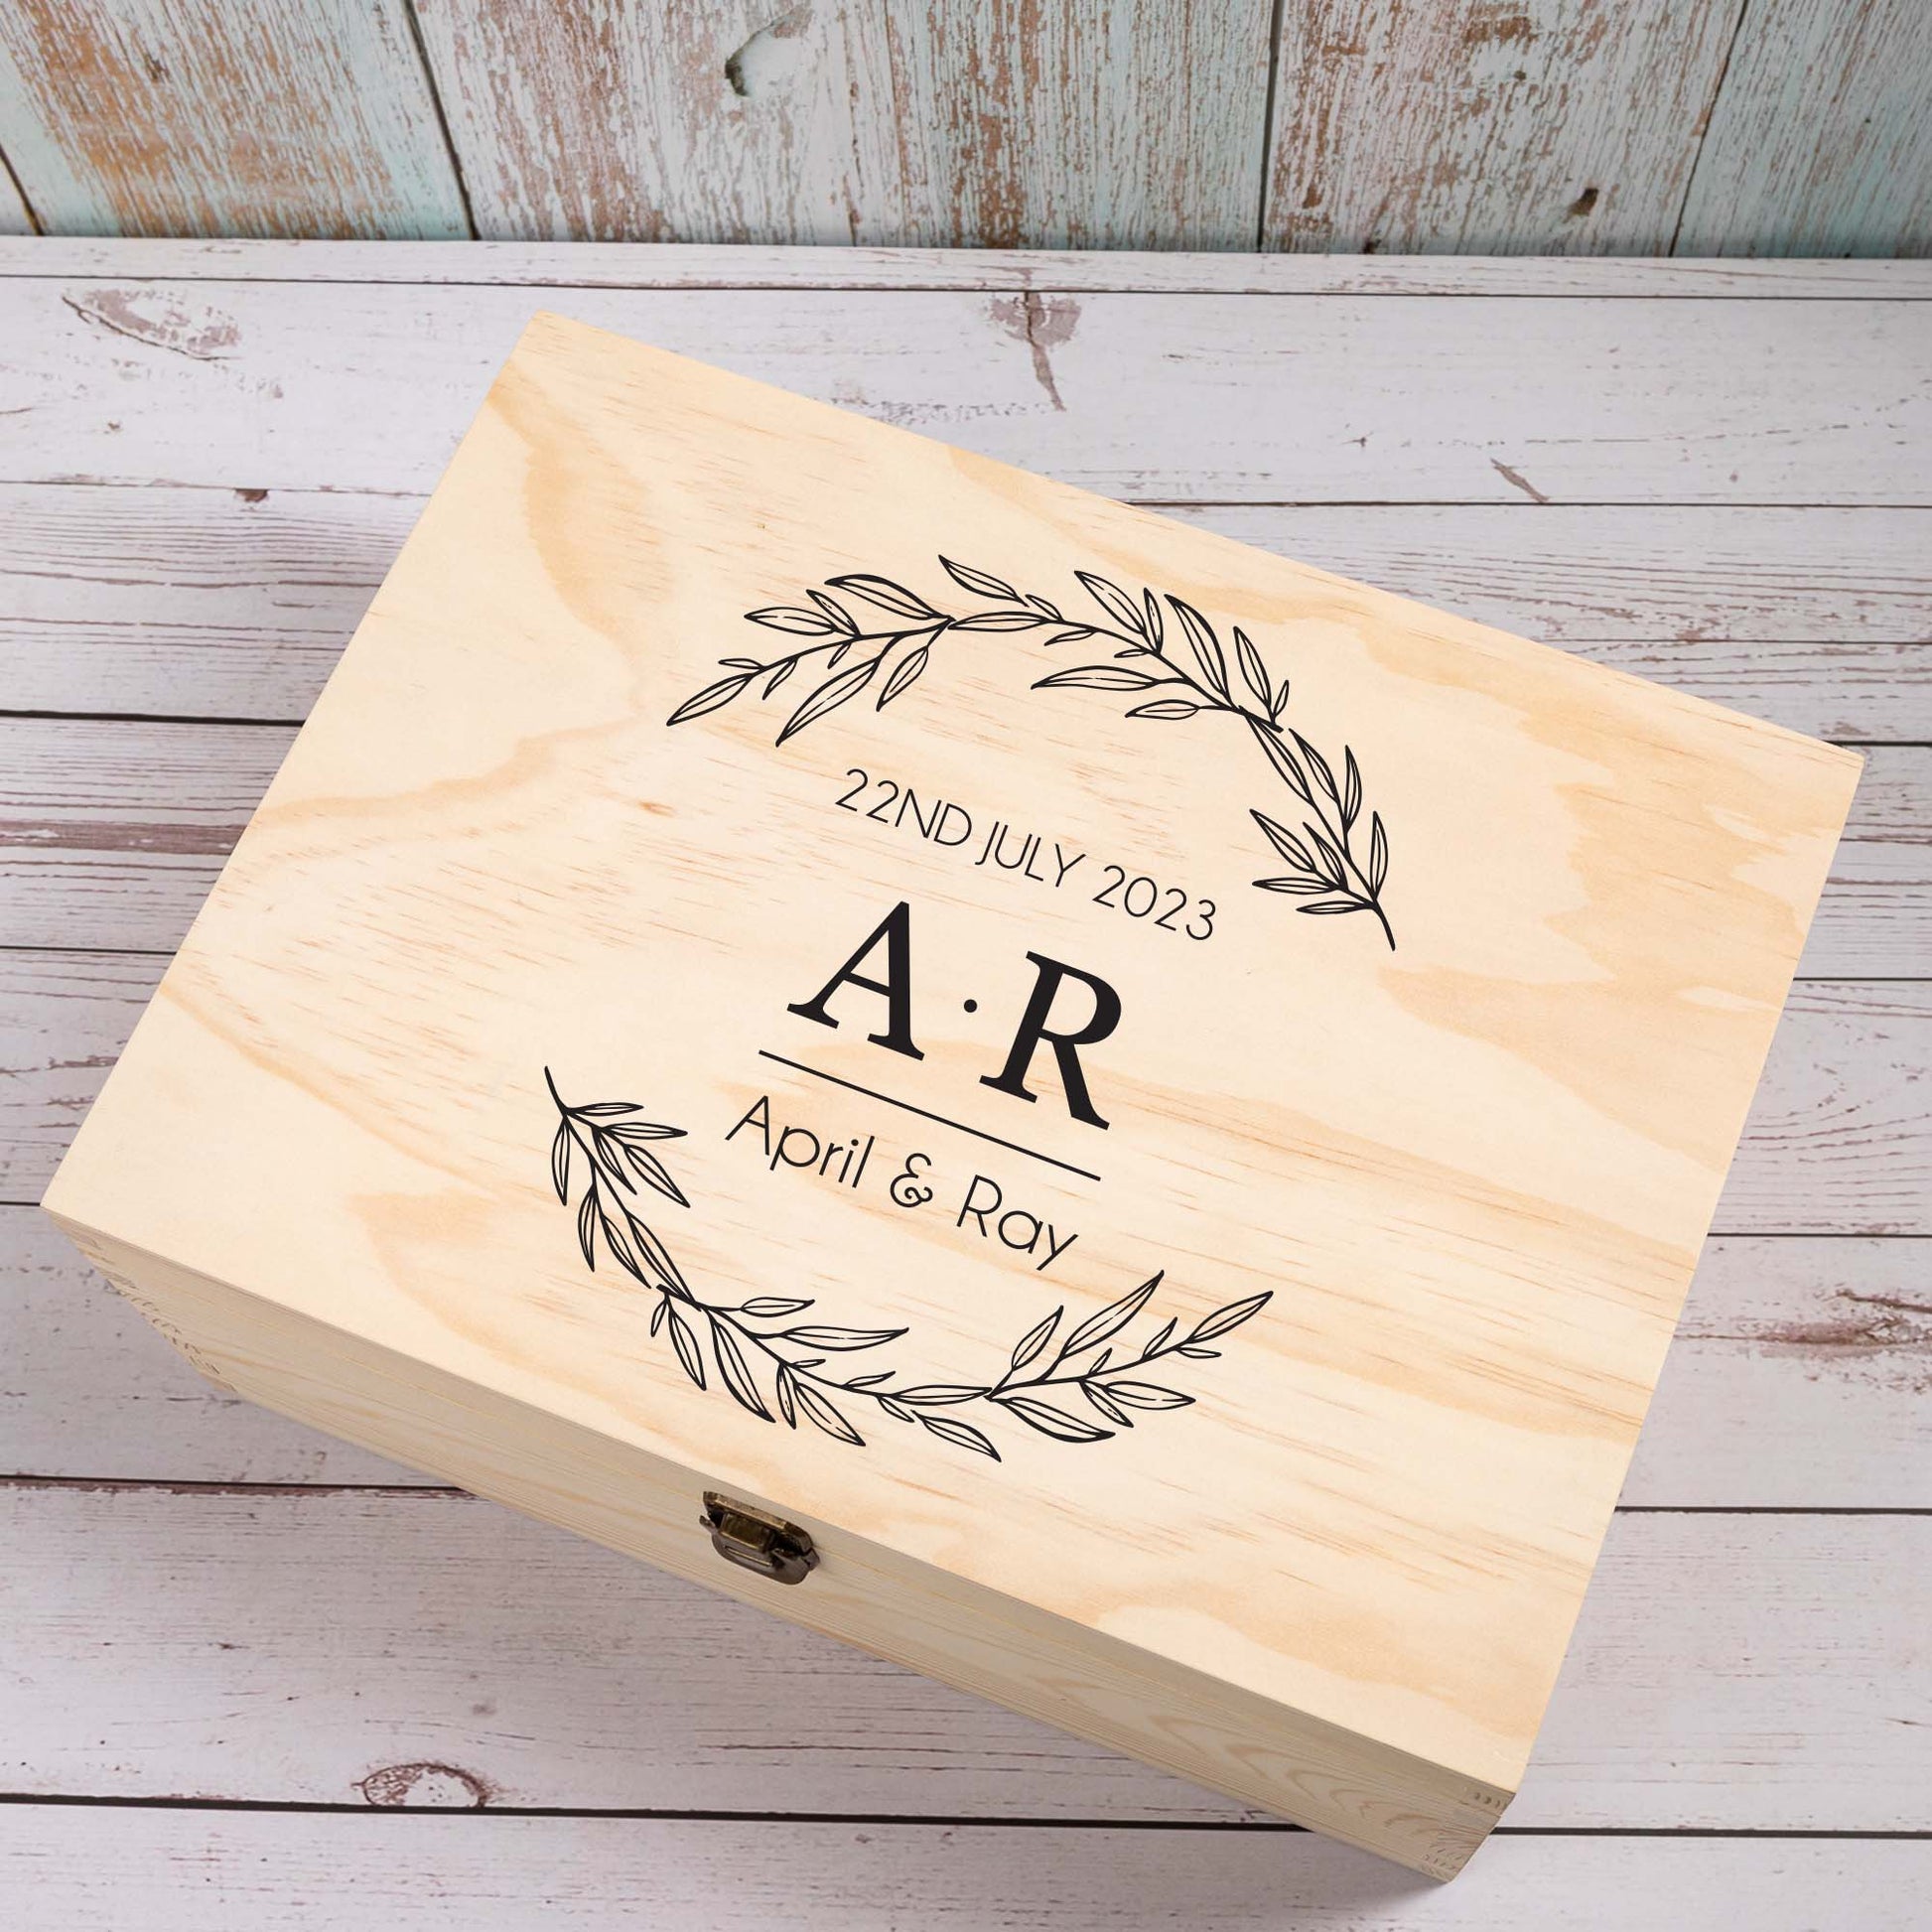 Personalised Wooden Keepsake box for a couple, 5th Anniversary Gift Wood, Laser engraved Treasure Box, Fifth wedding anniversary gift